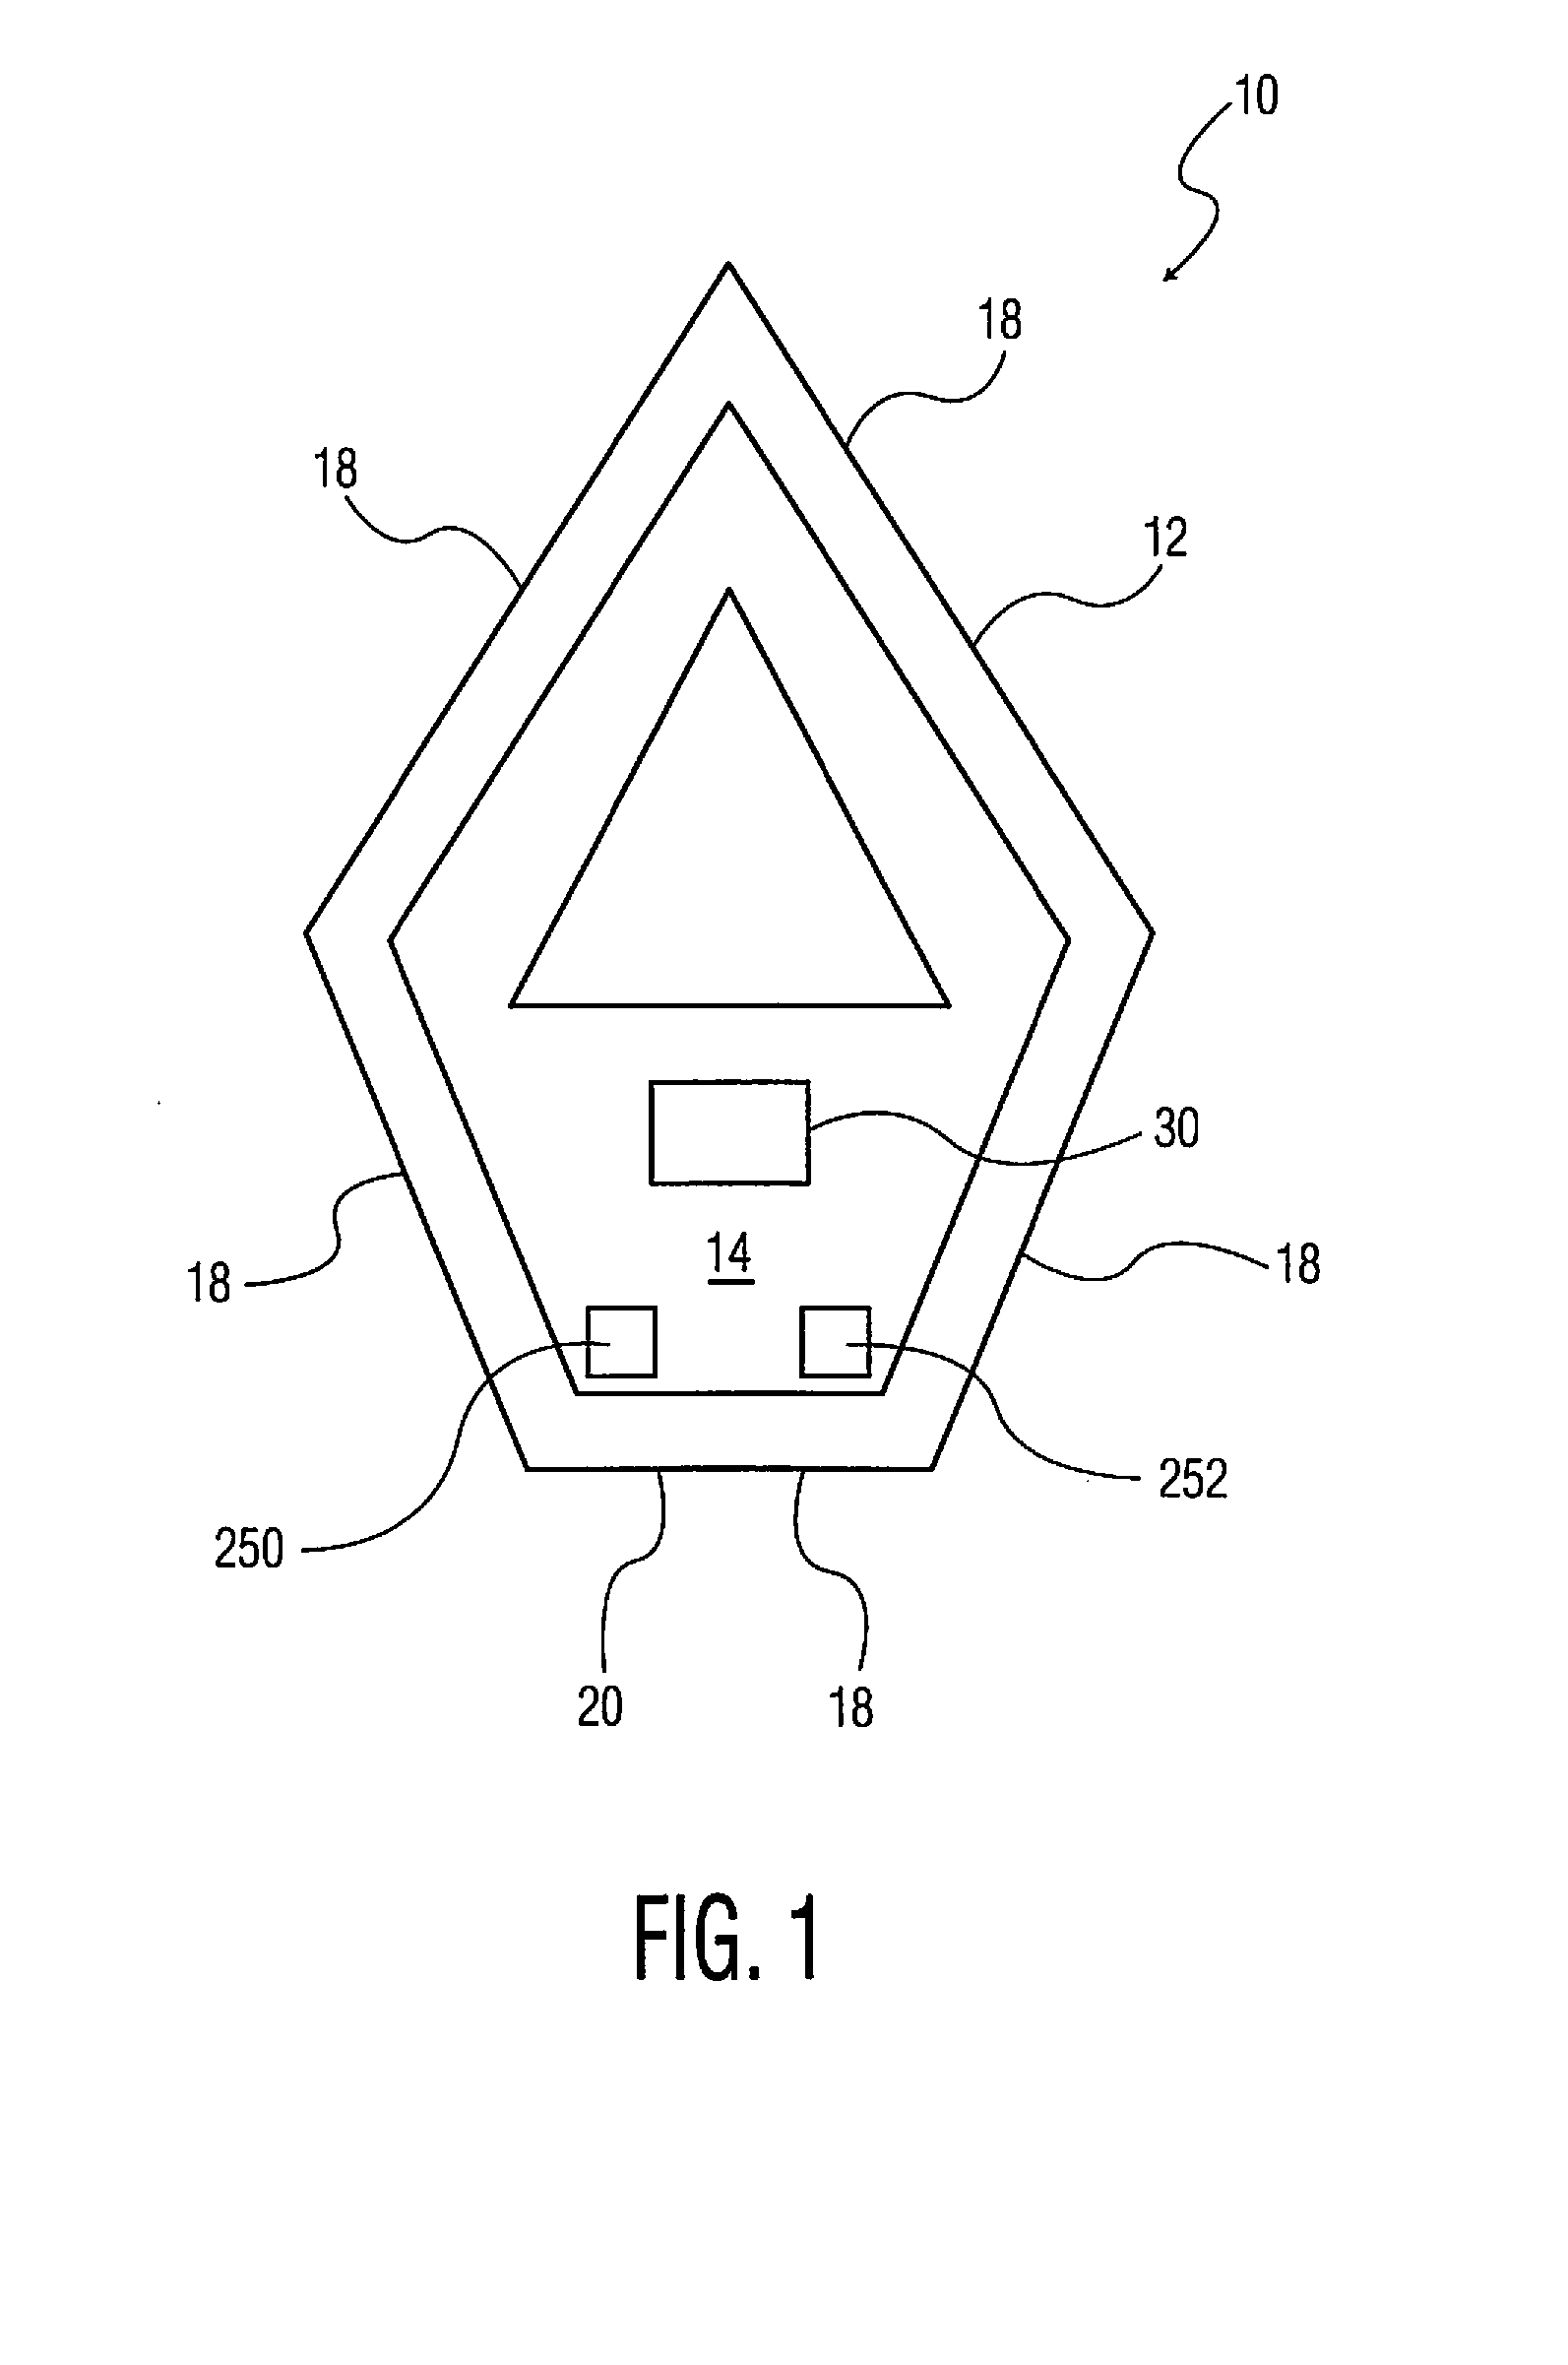 Signaling Device for an Obscured Environment